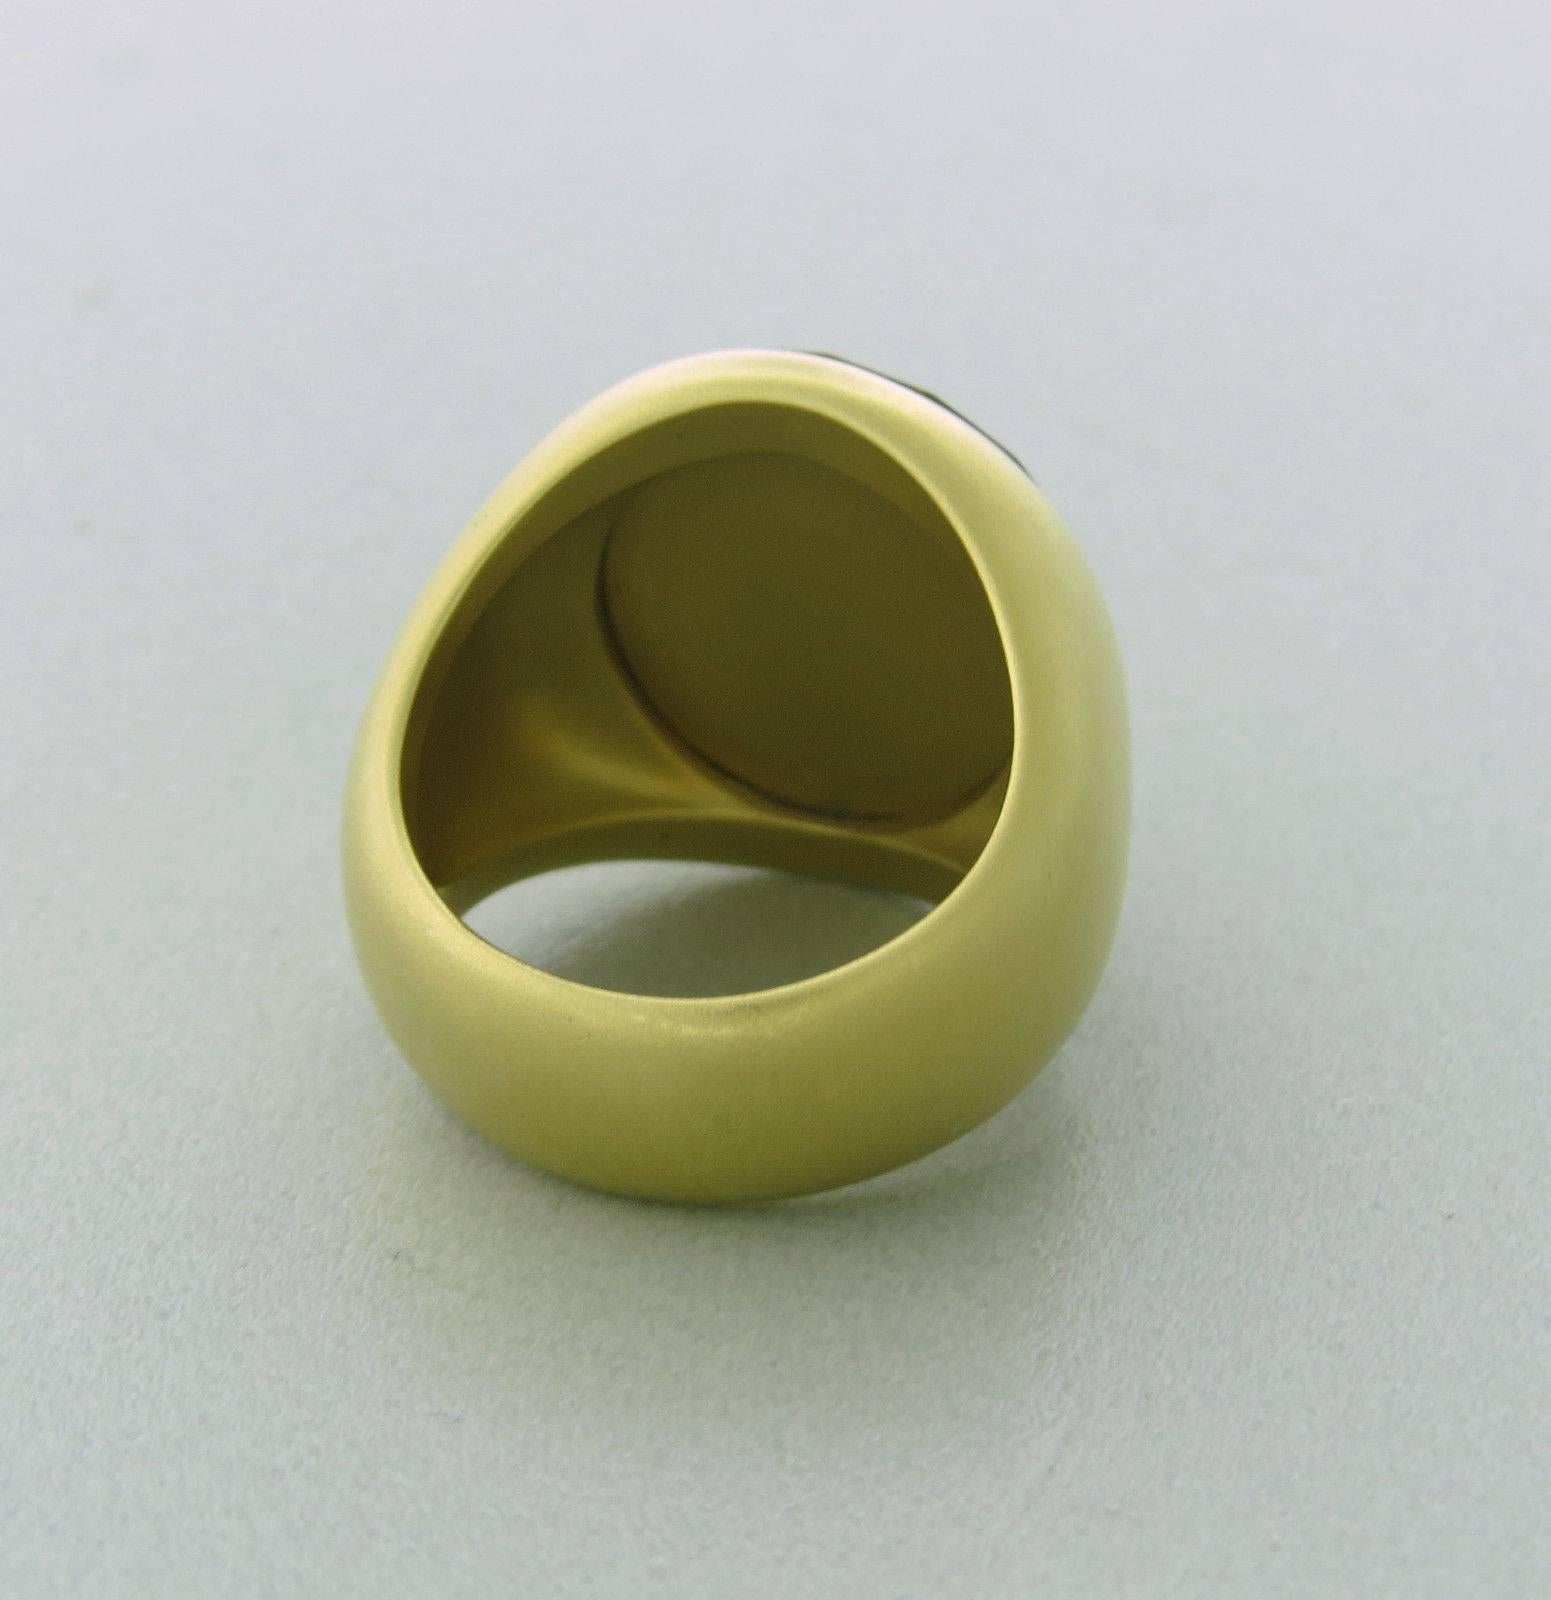 Pomellato ring crafted for the Narciso collection. Features lemon quartz. Ring top measures 20mm x 15.5mm. Ring size 6. Marked Pomellato 750. Weight-17.8 grams. Retails for $5070.